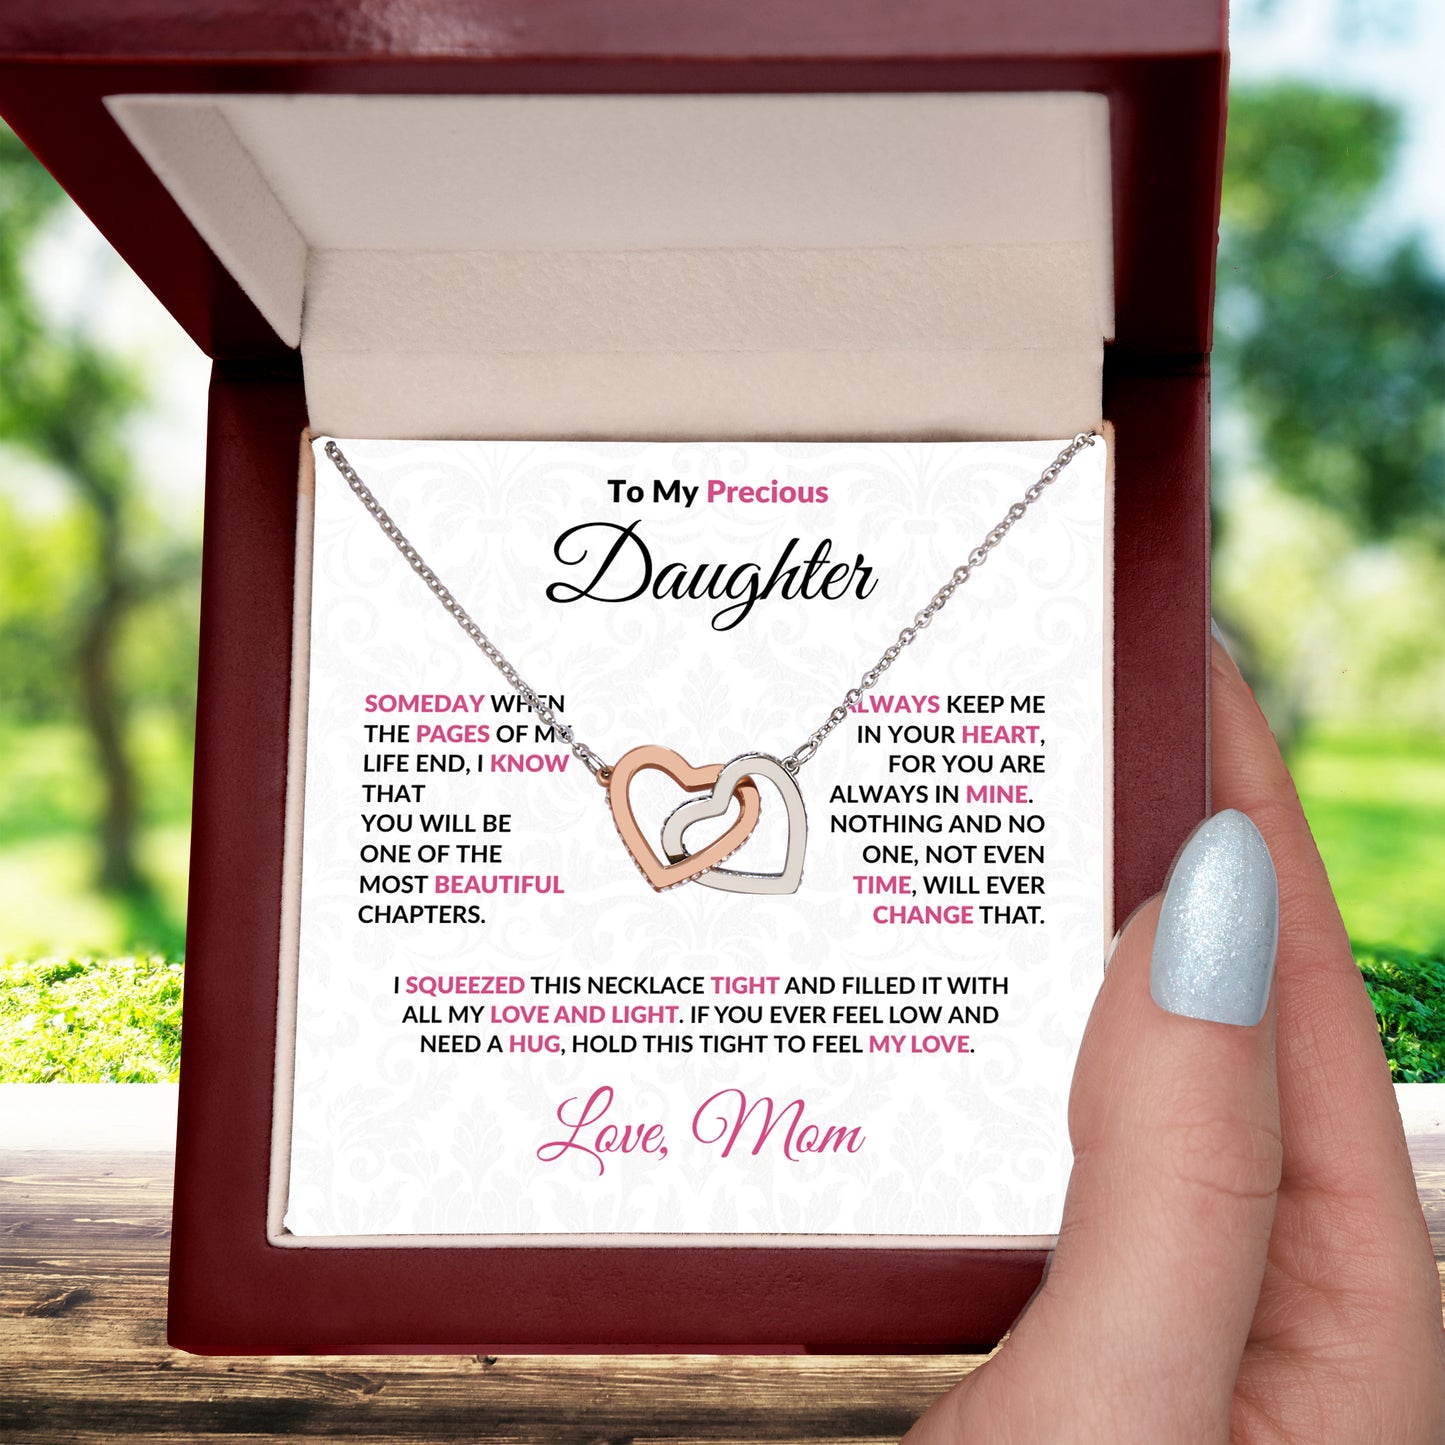 To My Precious Daughter Interlocking Hearts Pendant Necklace with Message Card